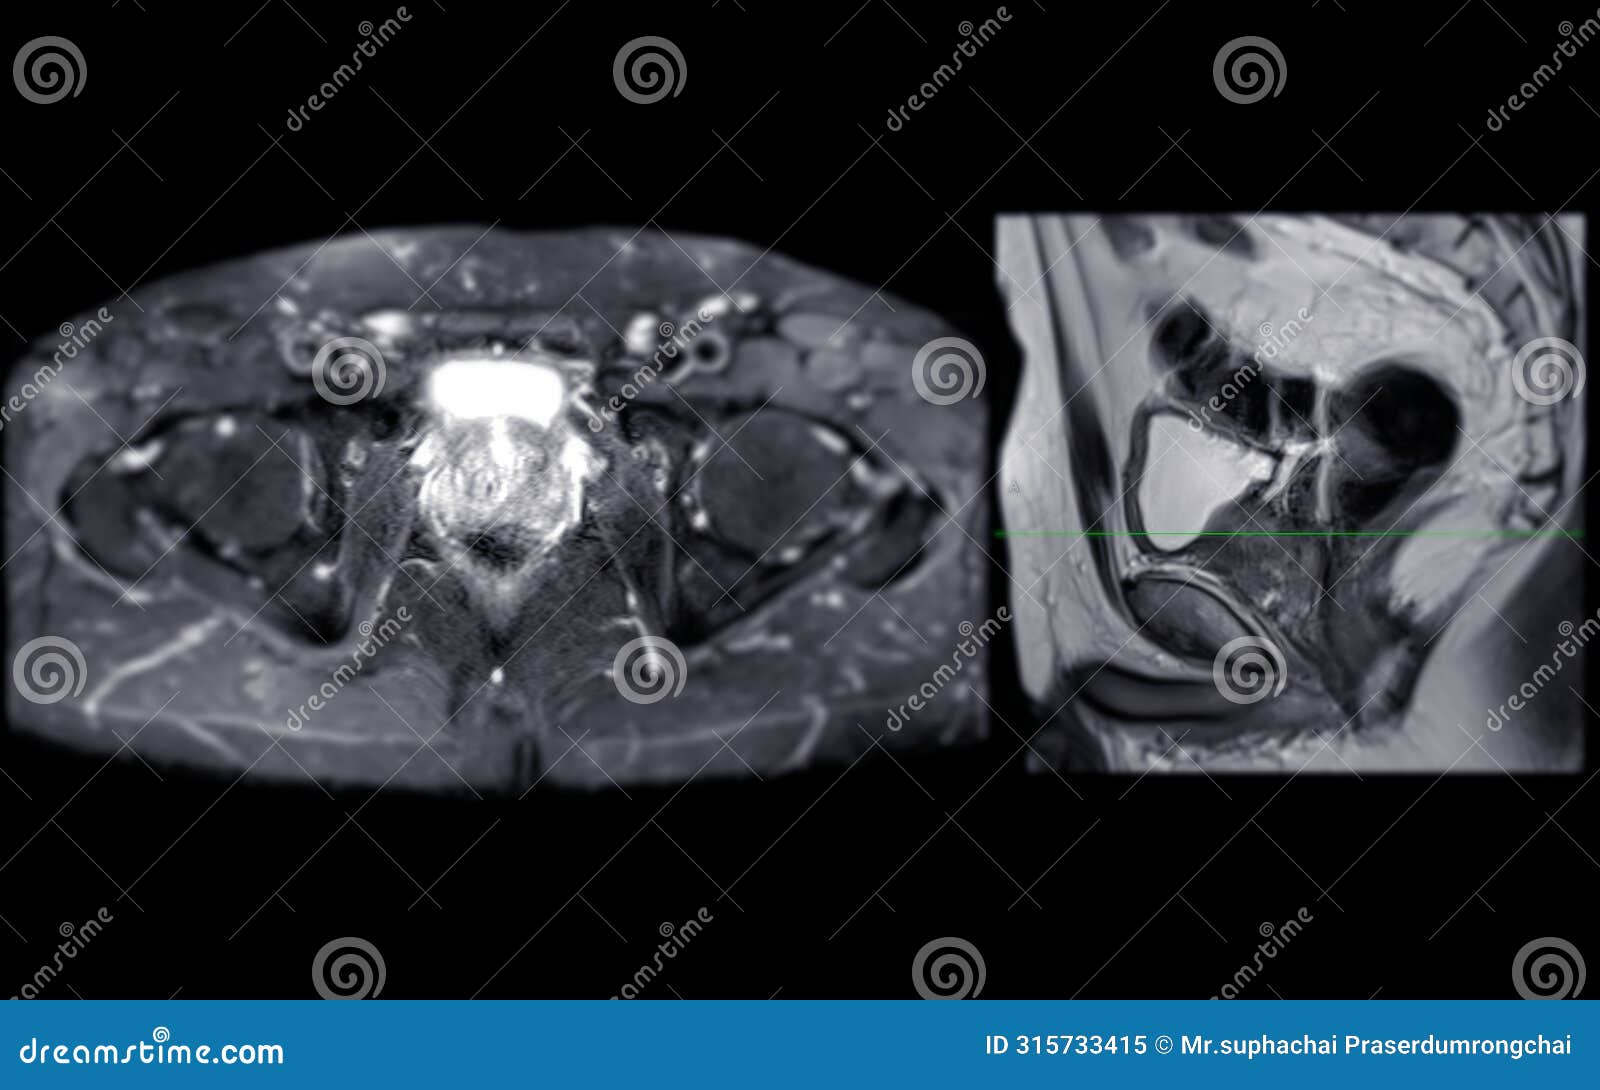 mri of the prostate gland reveals focal abnormal si lesion at left pzpl at apex as described; pi-rads category 4, clinically